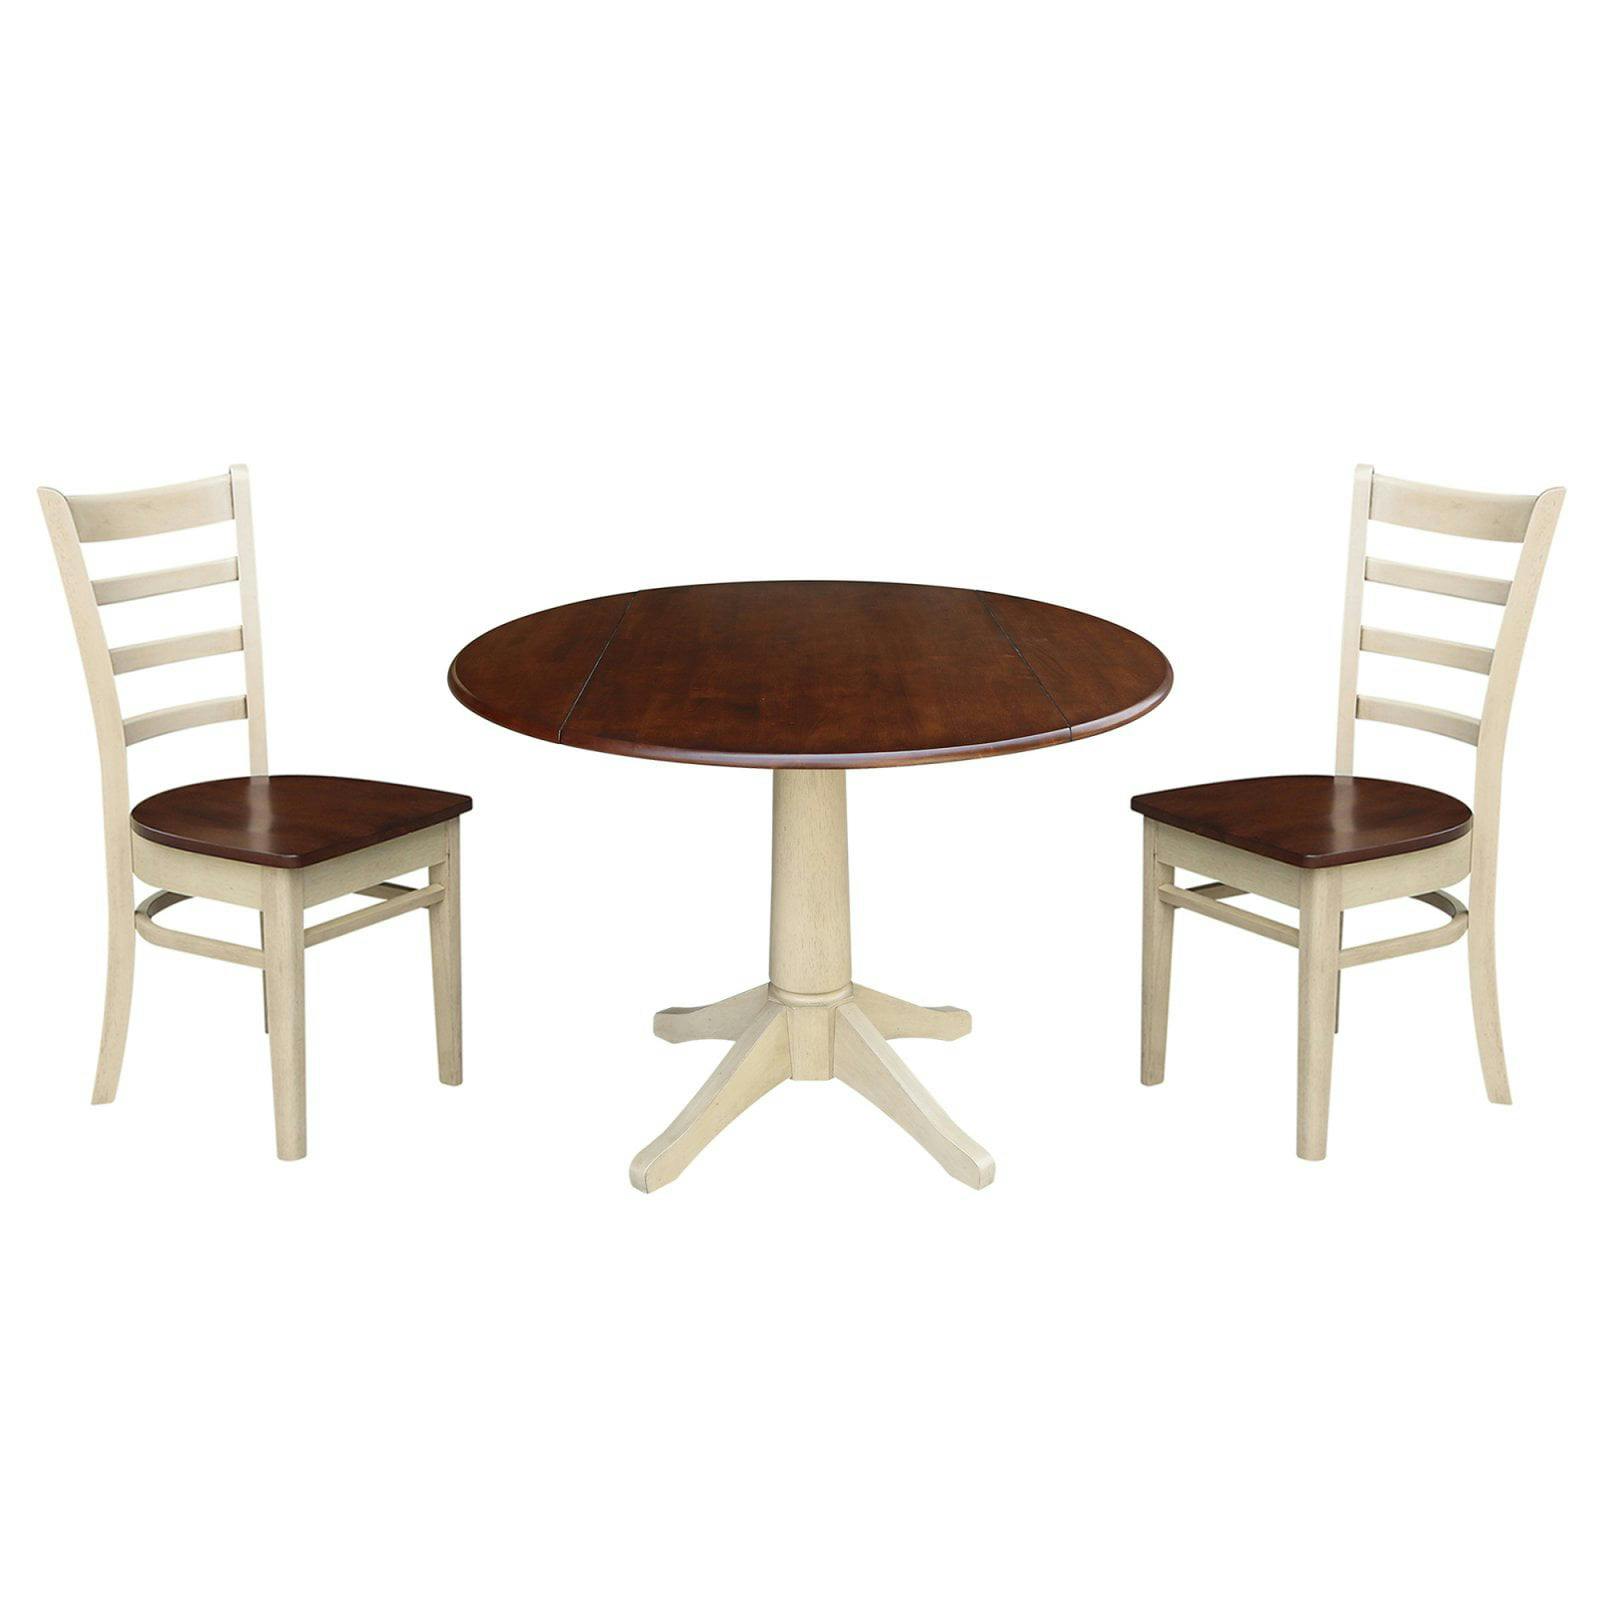 Almond Espresso Solid Wood Round Pedestal Dining Set with Ladder Back Chairs